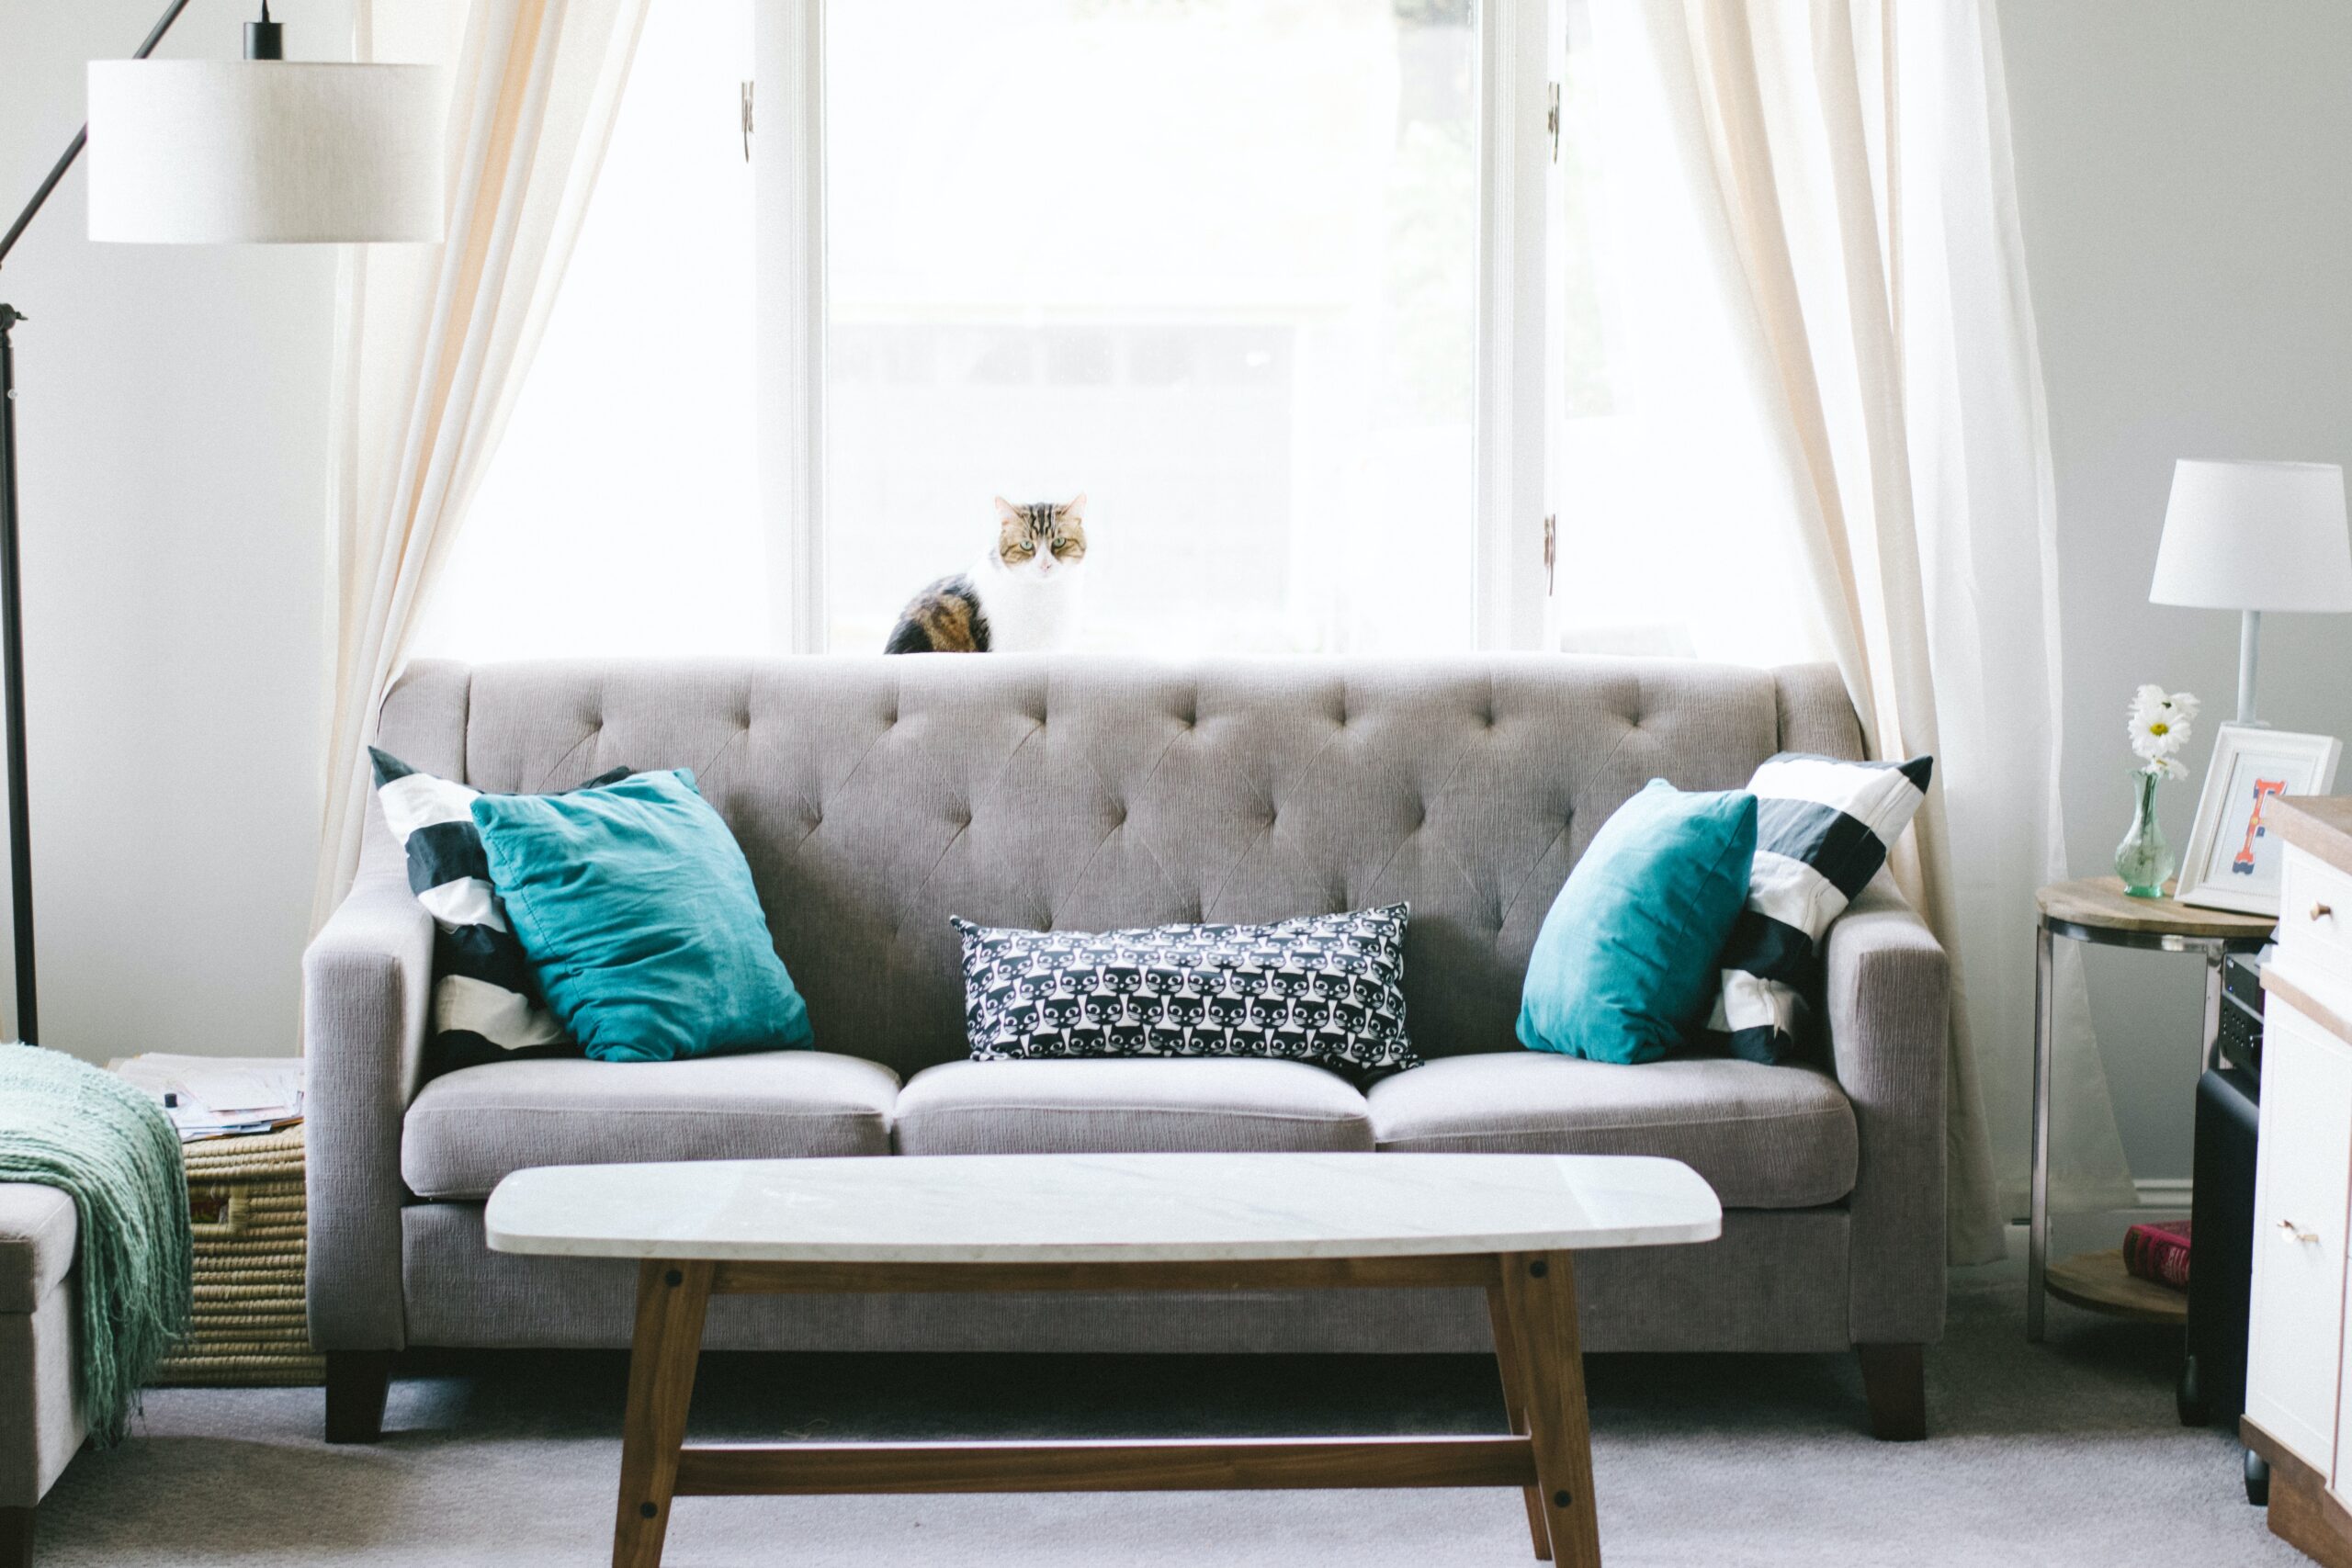 What furniture should property owners provide for a HMO